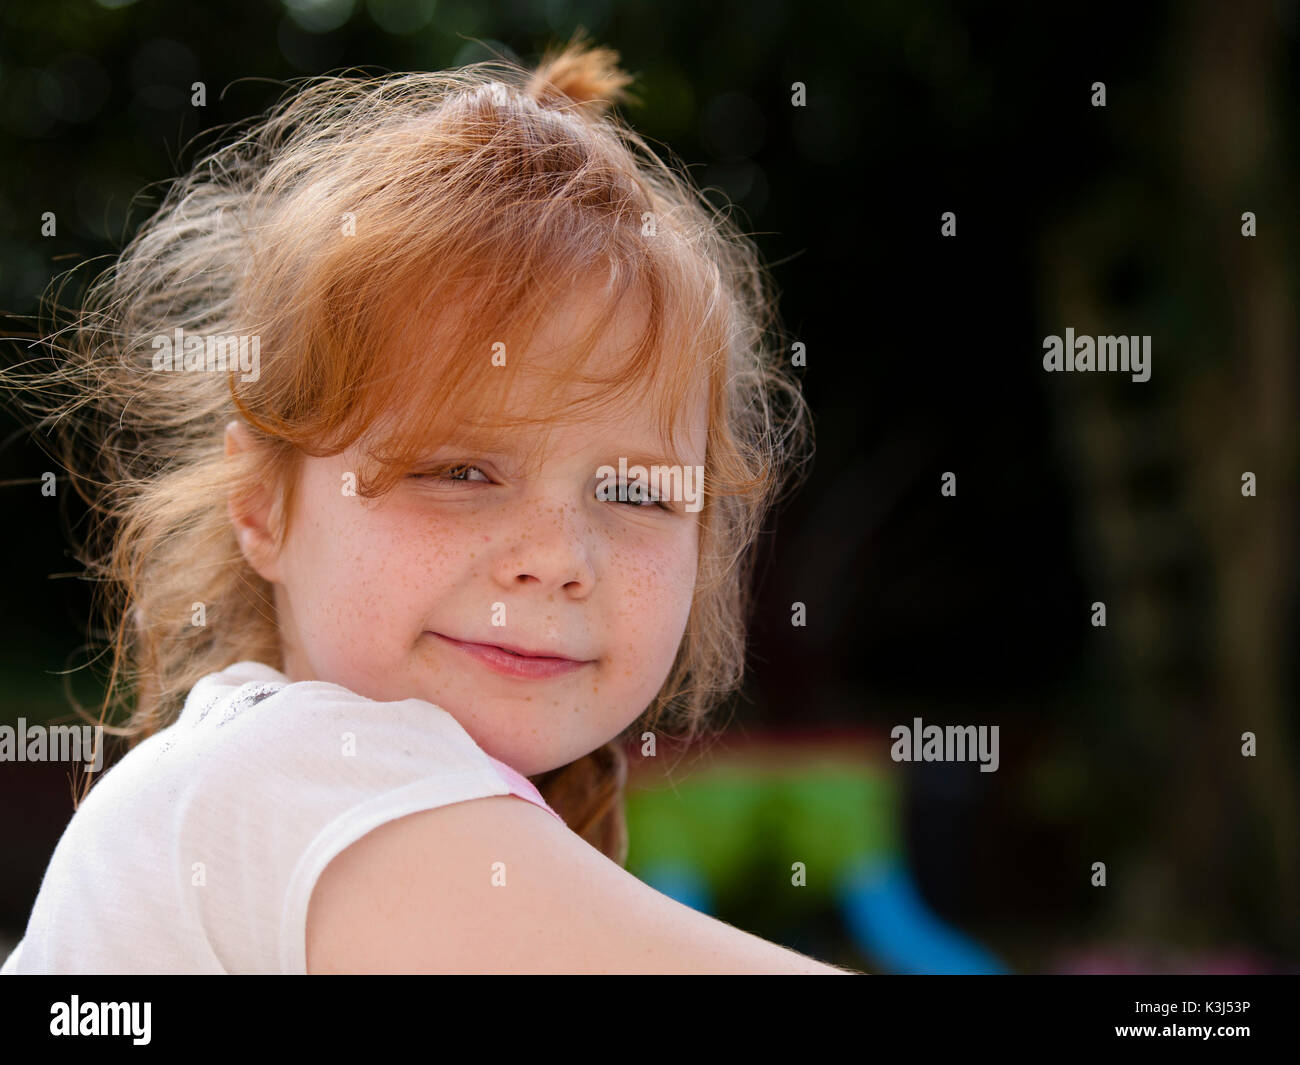 Young girl with red hair looking into Camera against a dark background, backlit Stock Photo